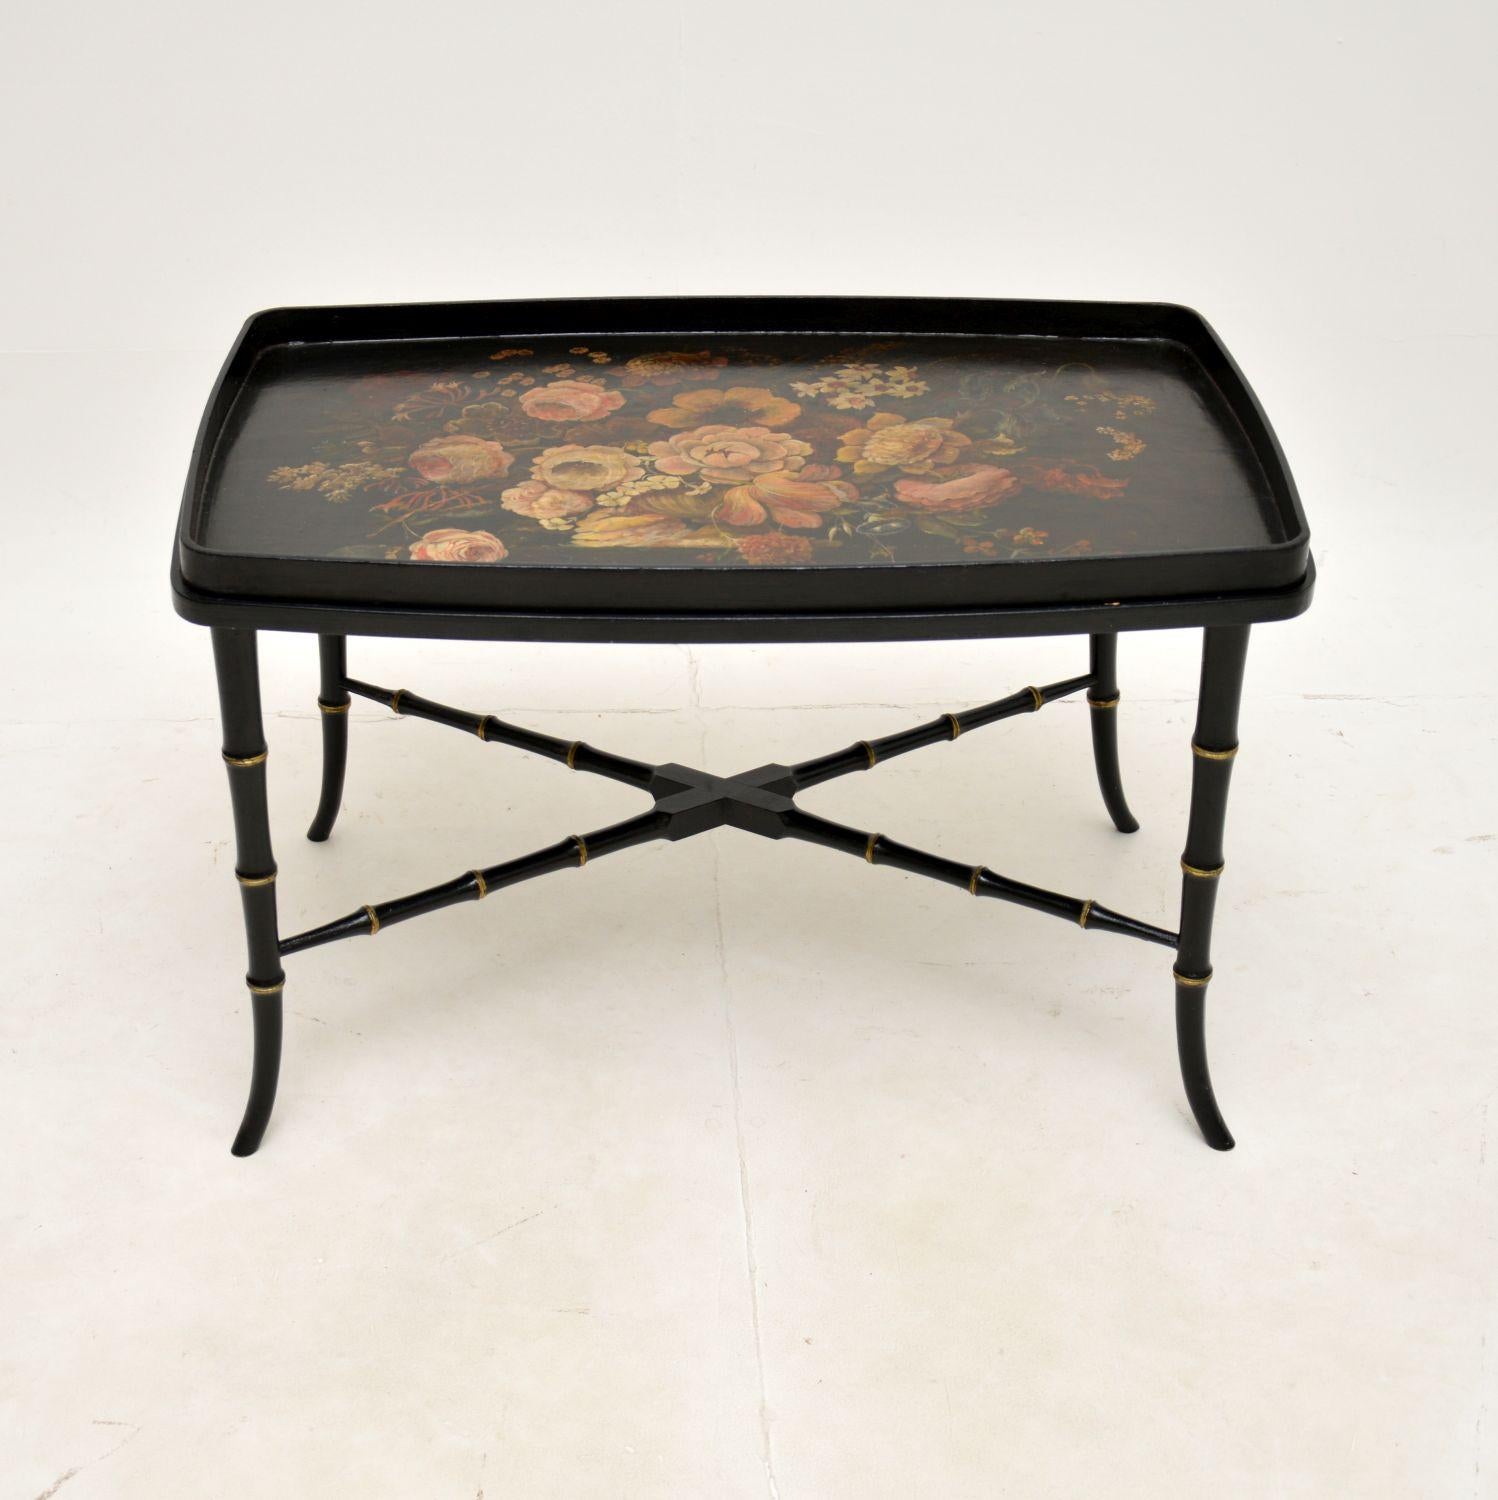 A stunning antique Regency style lacquered tray top coffee table. This was made in England, it dates from around the 1950-60’s.

The quality is superb, this is beautifully made and is a very useful size. The top lifts right off the base to be used